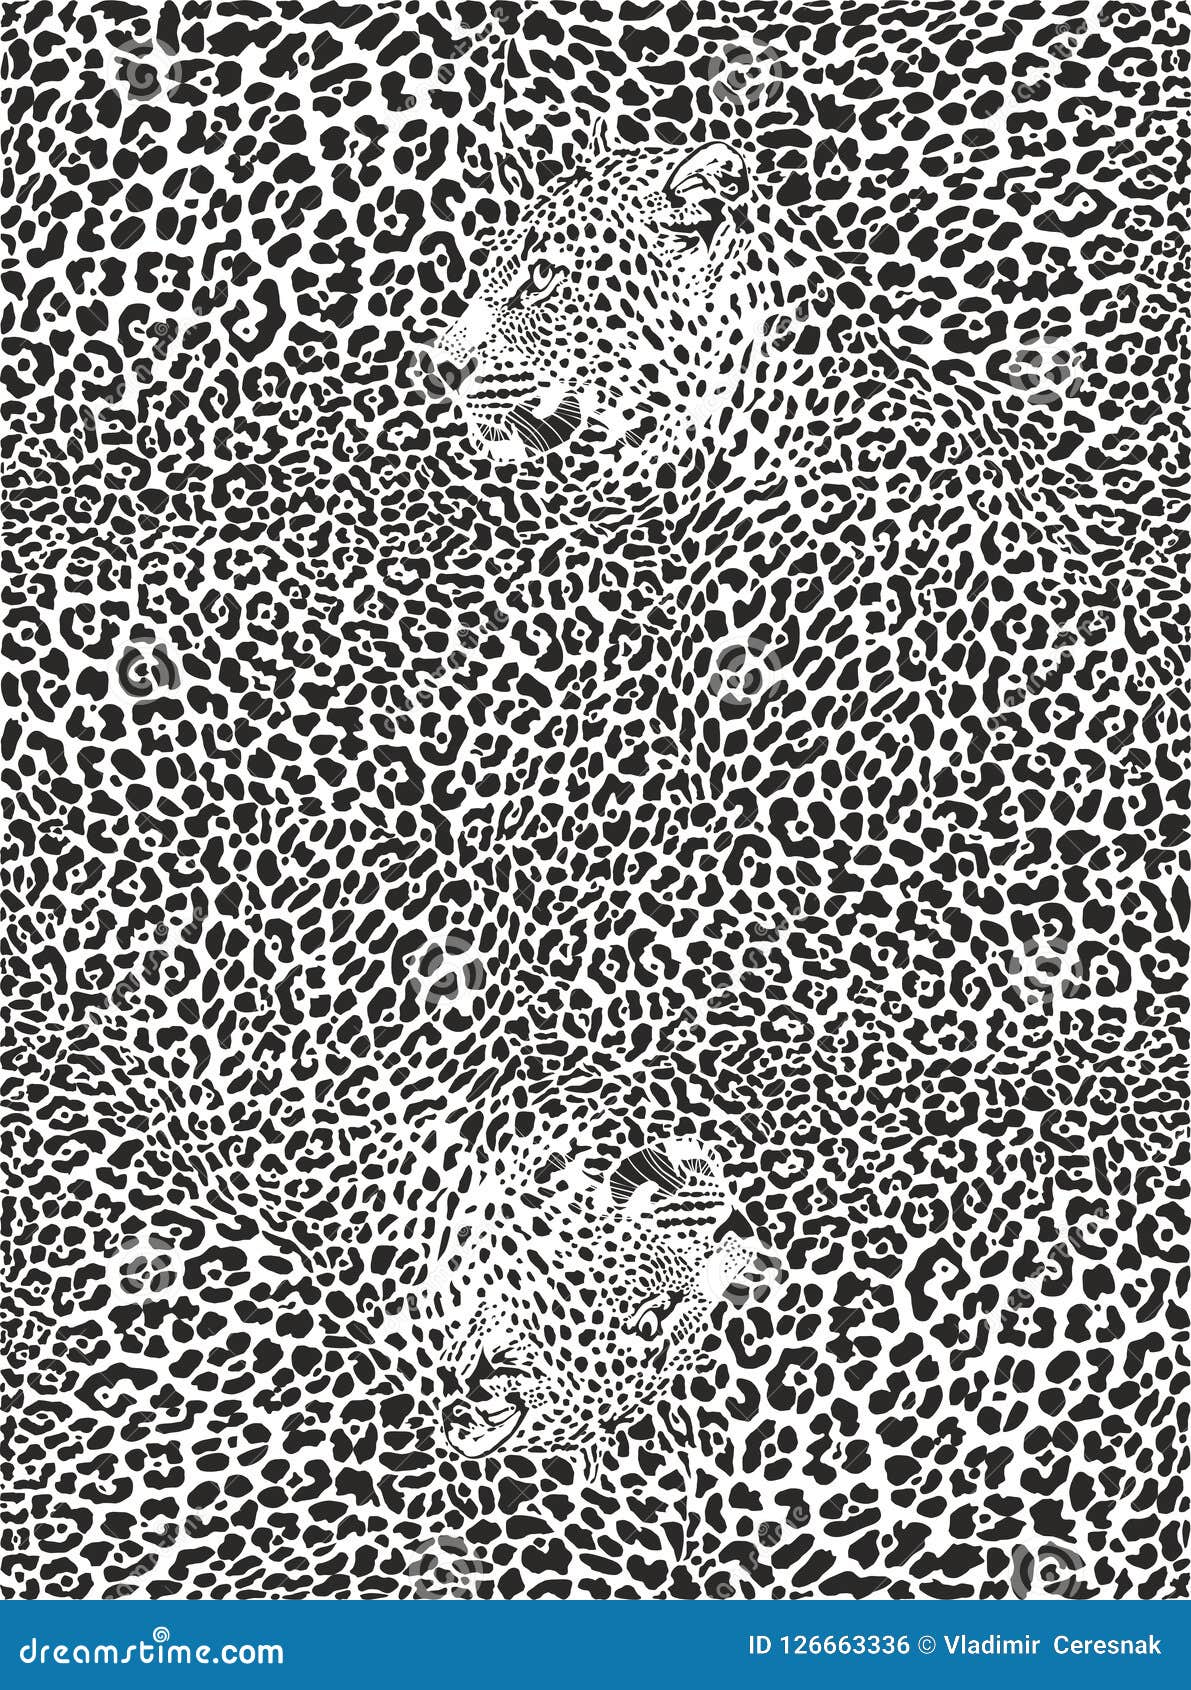 Background with Leopards, Black and White Illustration Stock Vector ...